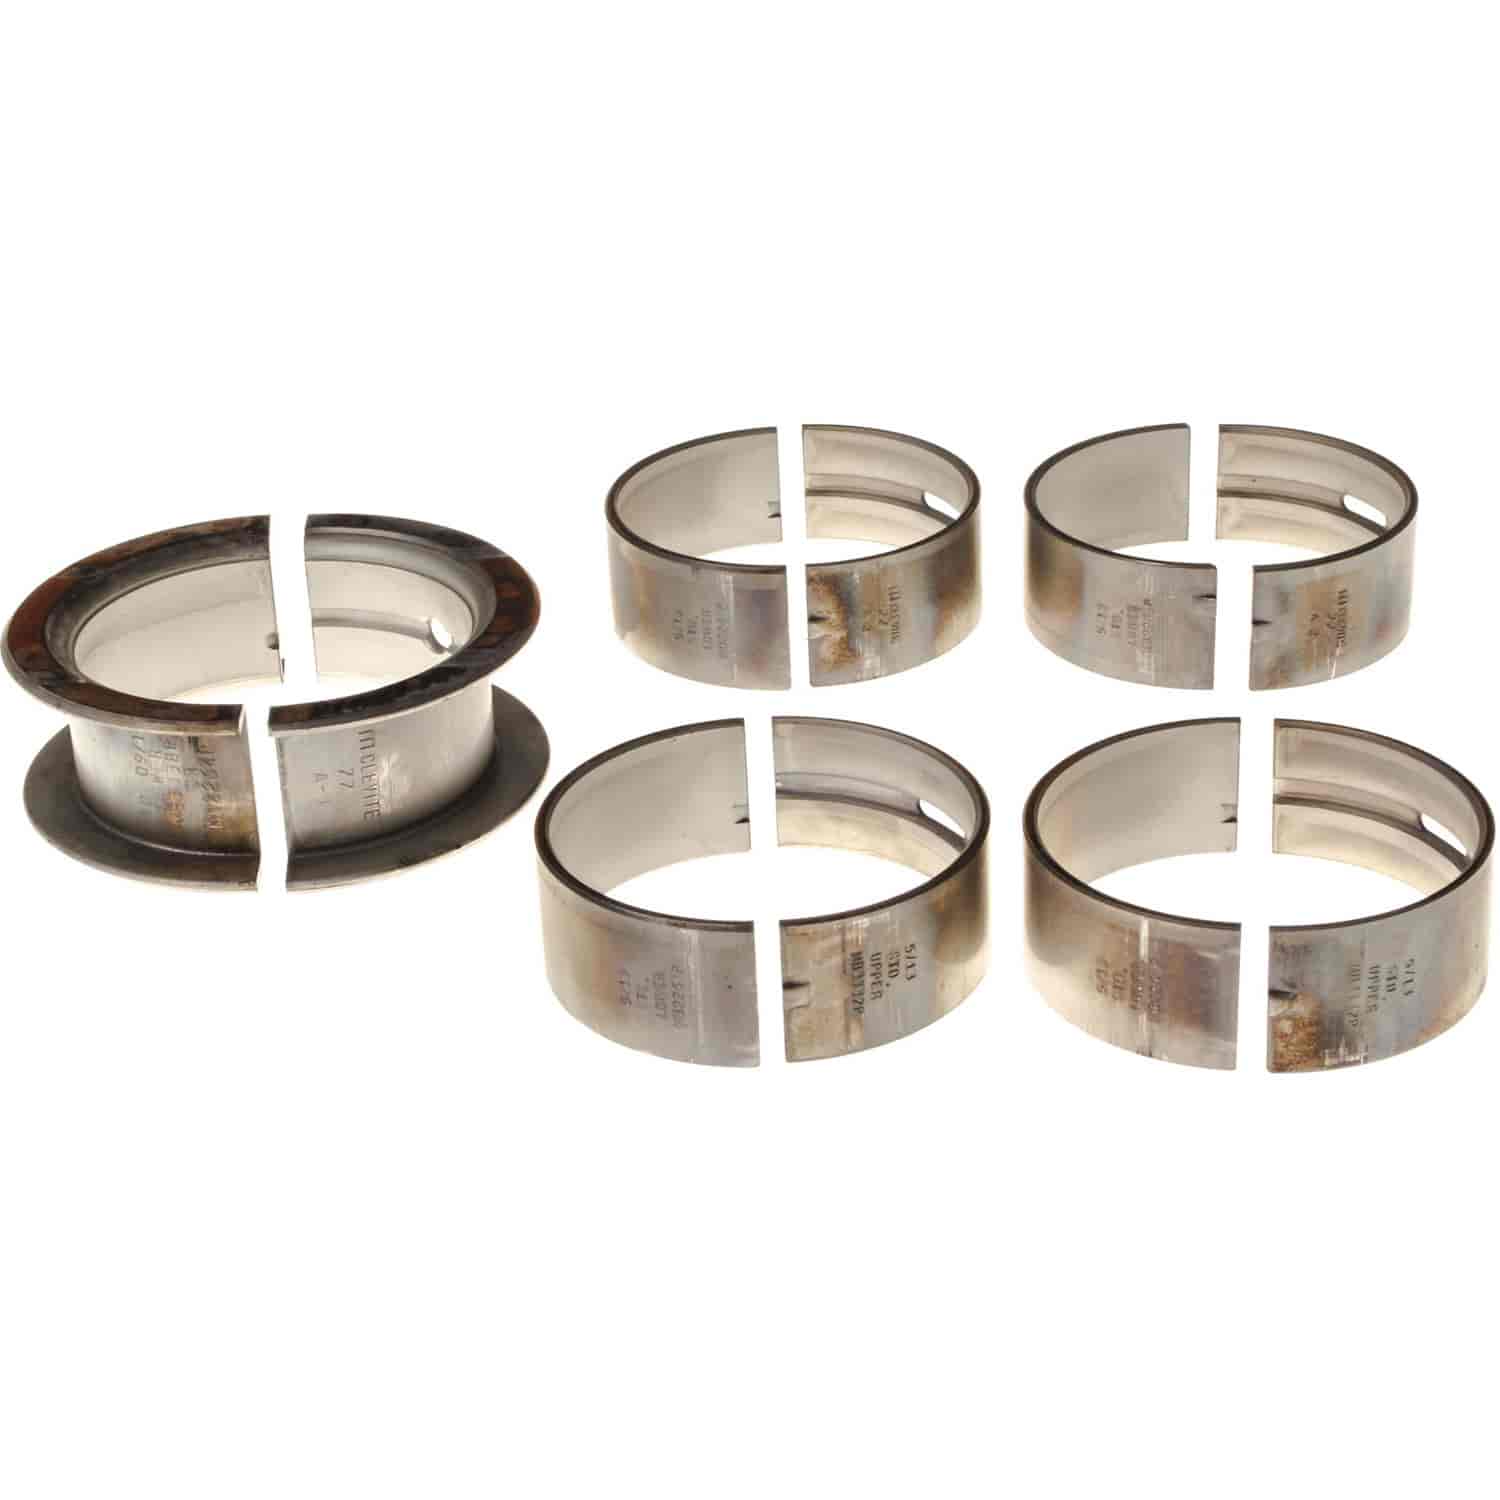 Main Bearing Set Chrysler/Jeep 1991-2002 L4 2.5L with